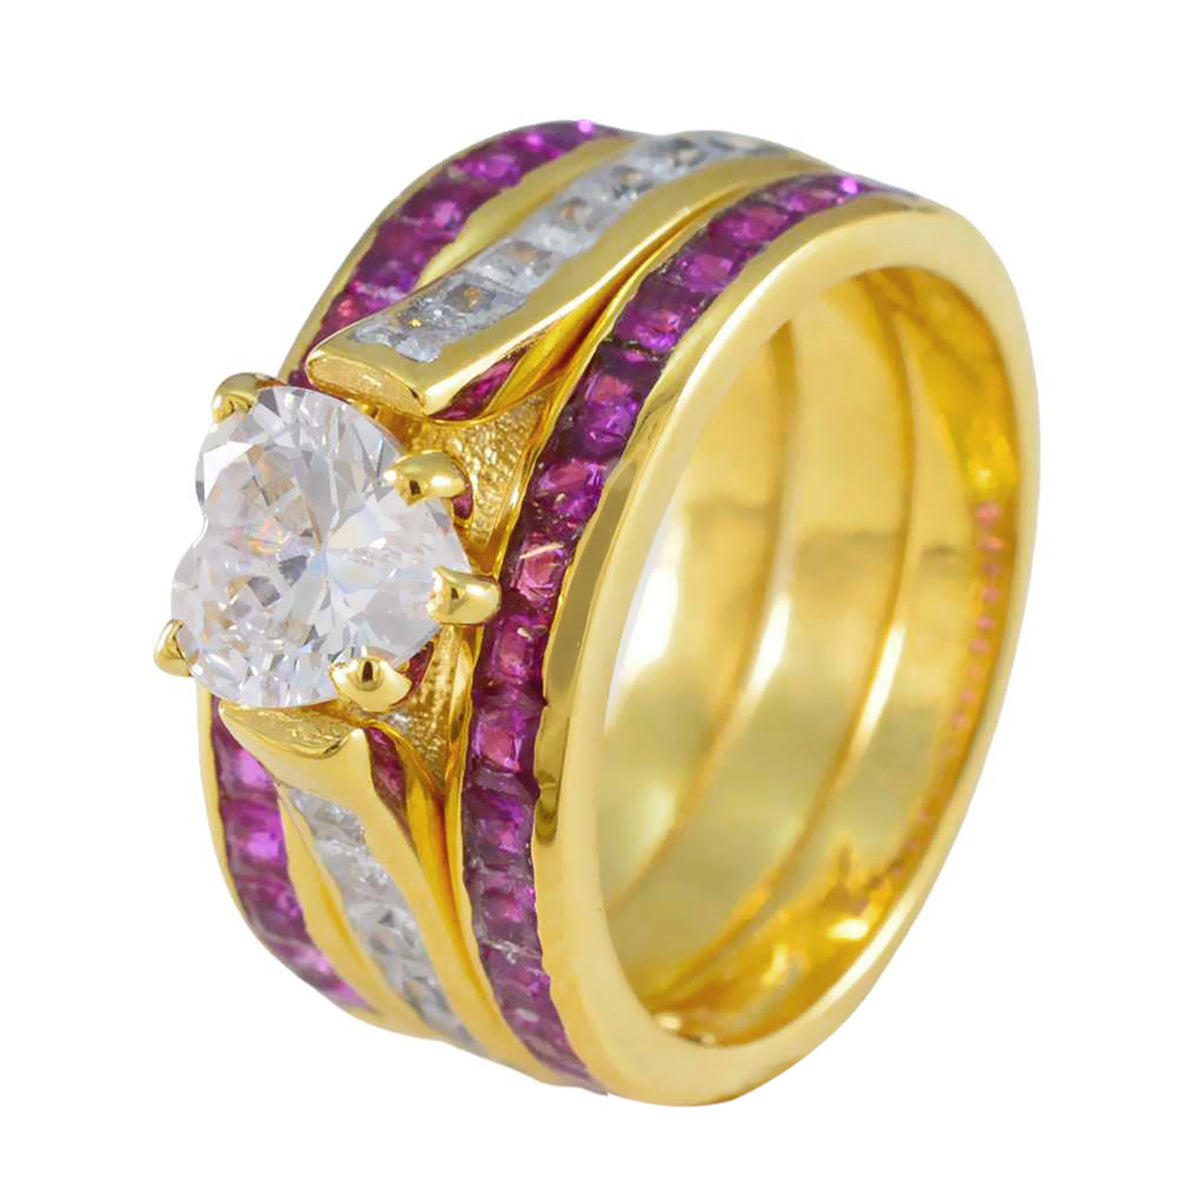 Riyo Wholesale Silver Ring With Yellow Gold Plating Ruby CZ Stone Heart Shape Prong Setting Bridal Jewelry Mothers Day Ring